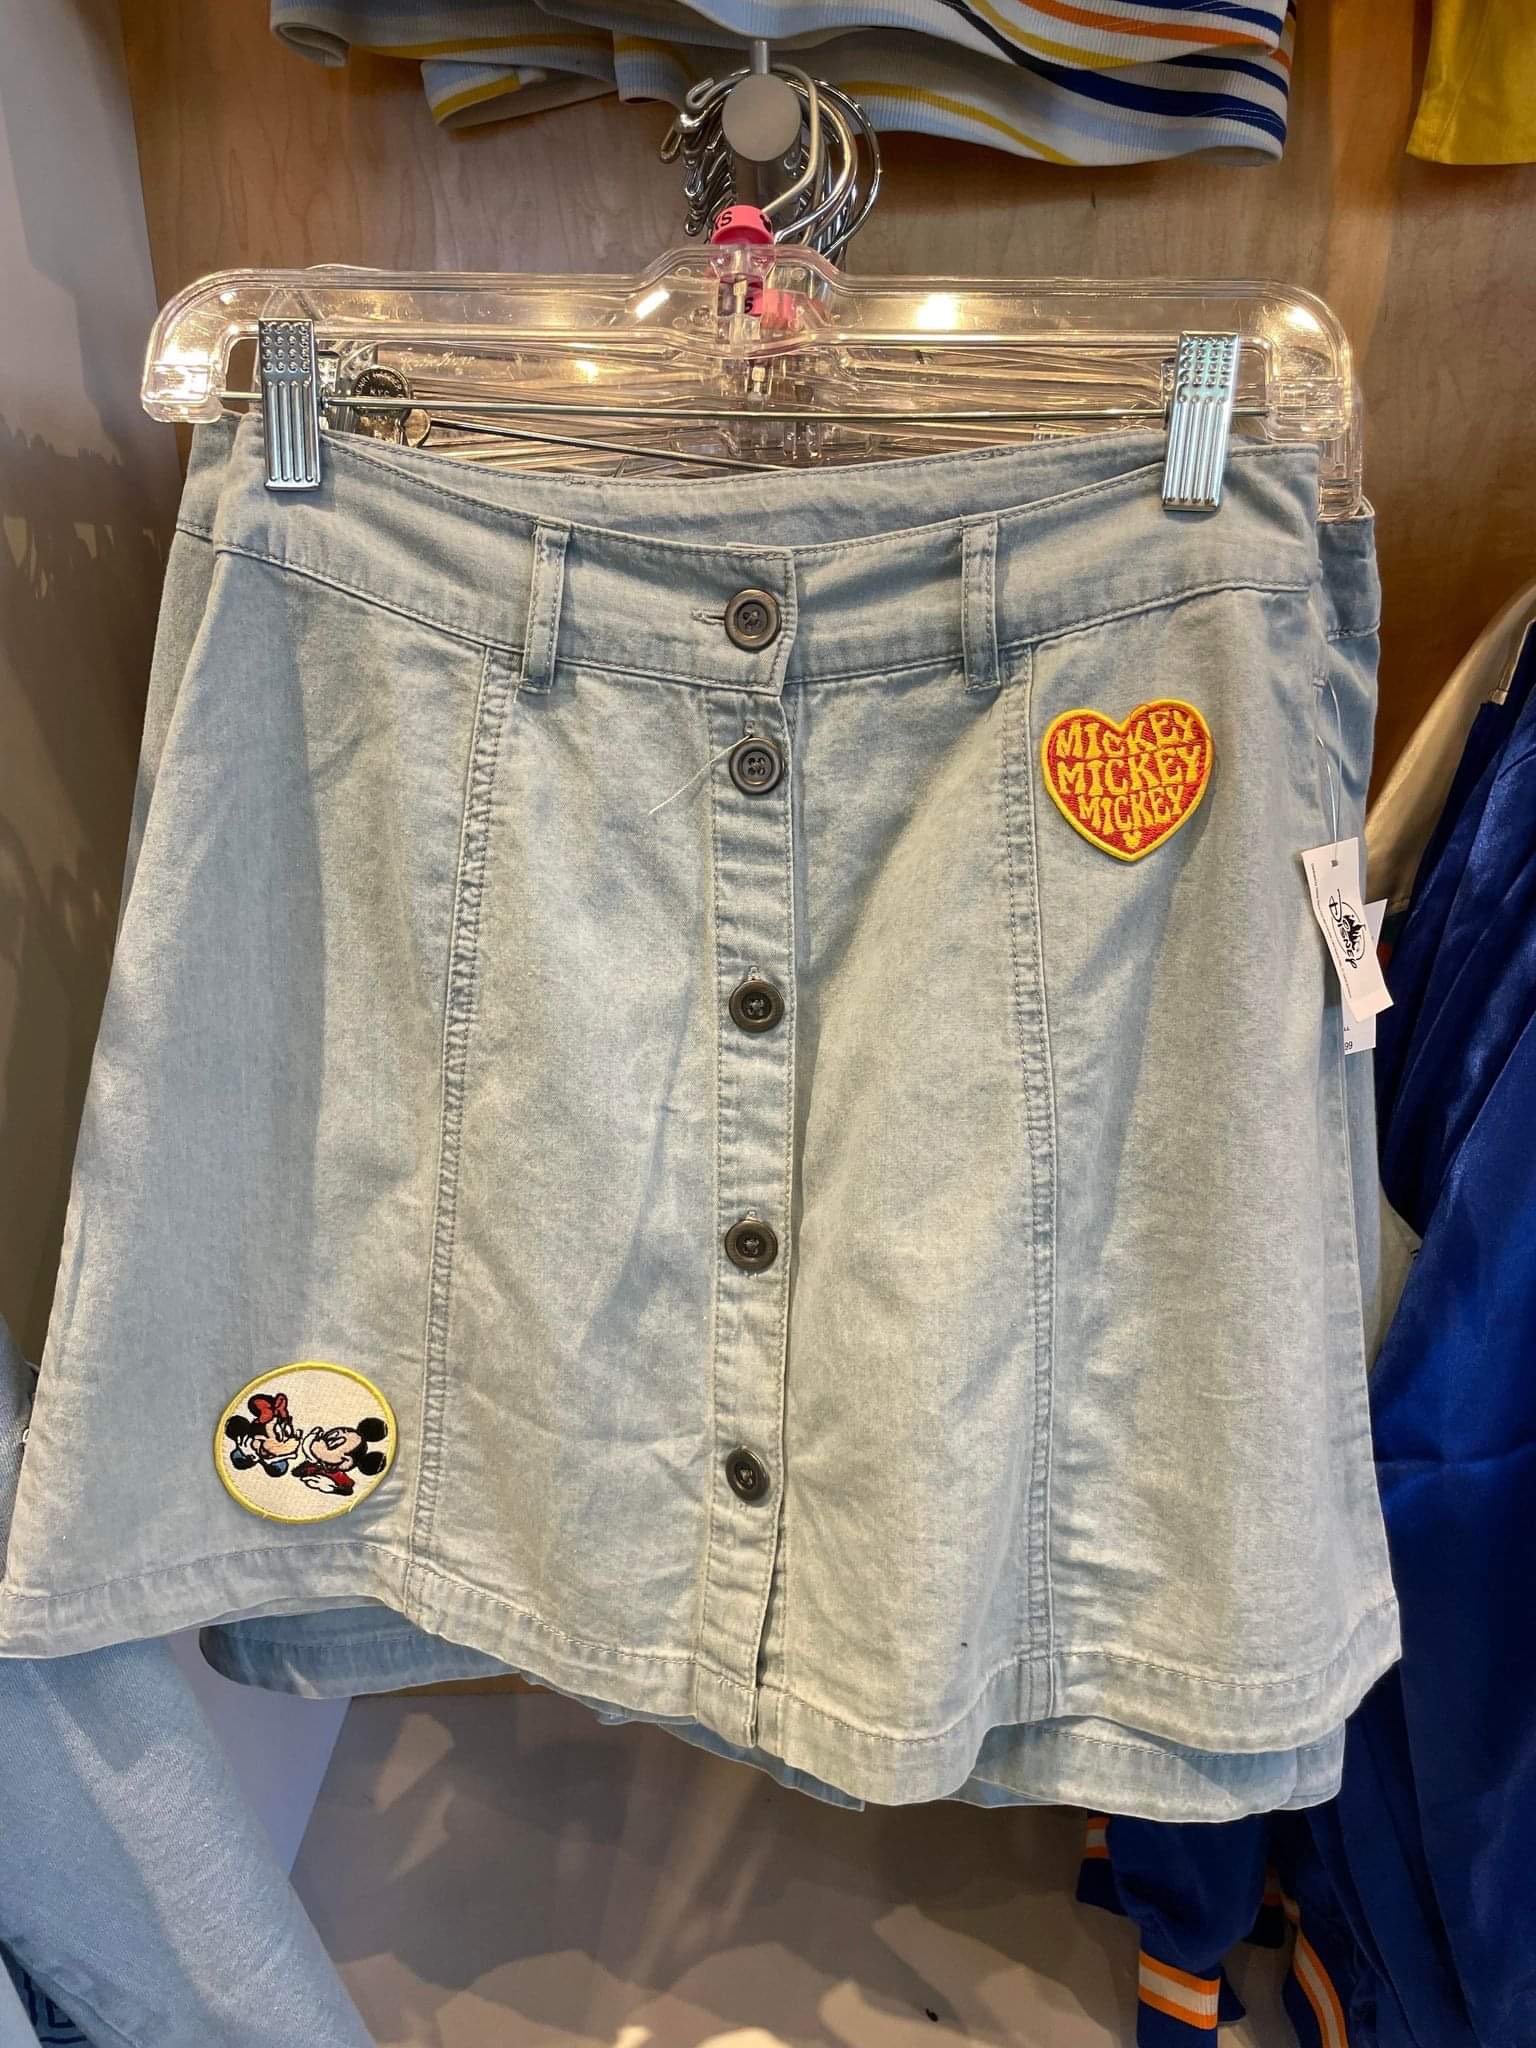 I’m going to need some of the fabulous new Disney clothes that just arrived on property and on ShopDisney that feature Mickey, Minnie,  Donald, and Daisy!